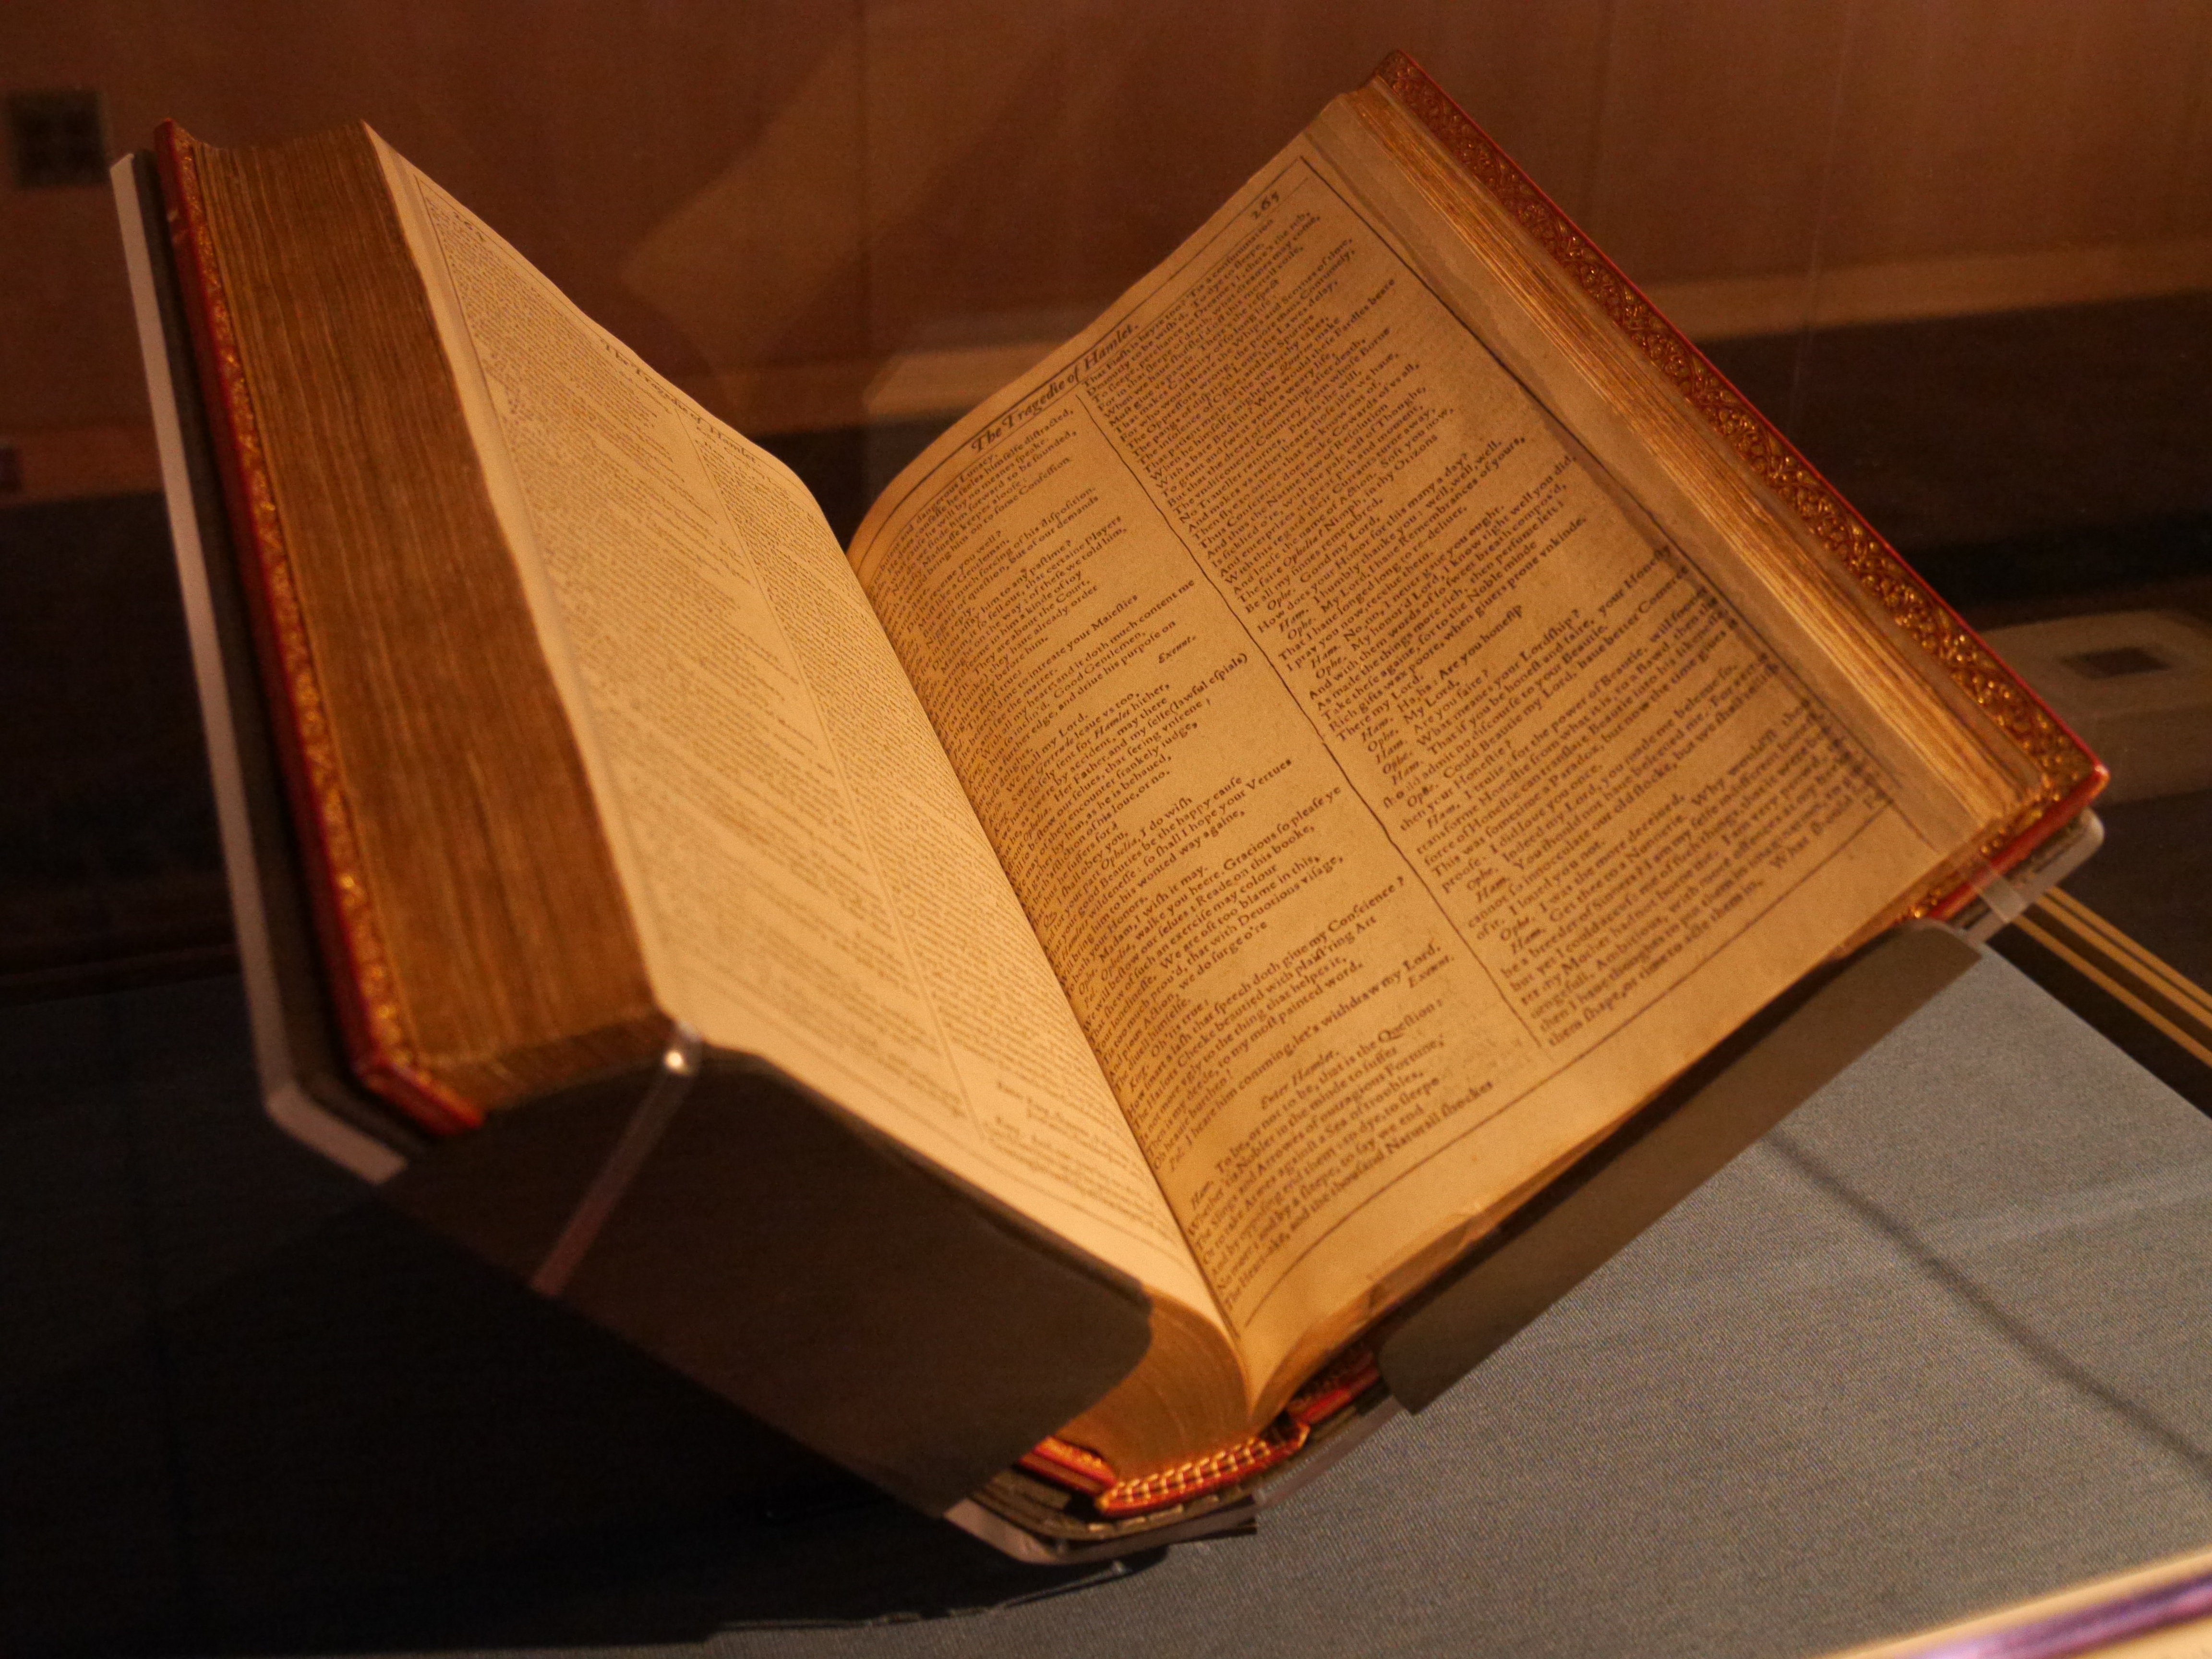 The First Folio sits in a temperature controlled container on display at the Alaska State Library. (Photo by Lakeidra Chavis/KTOO)